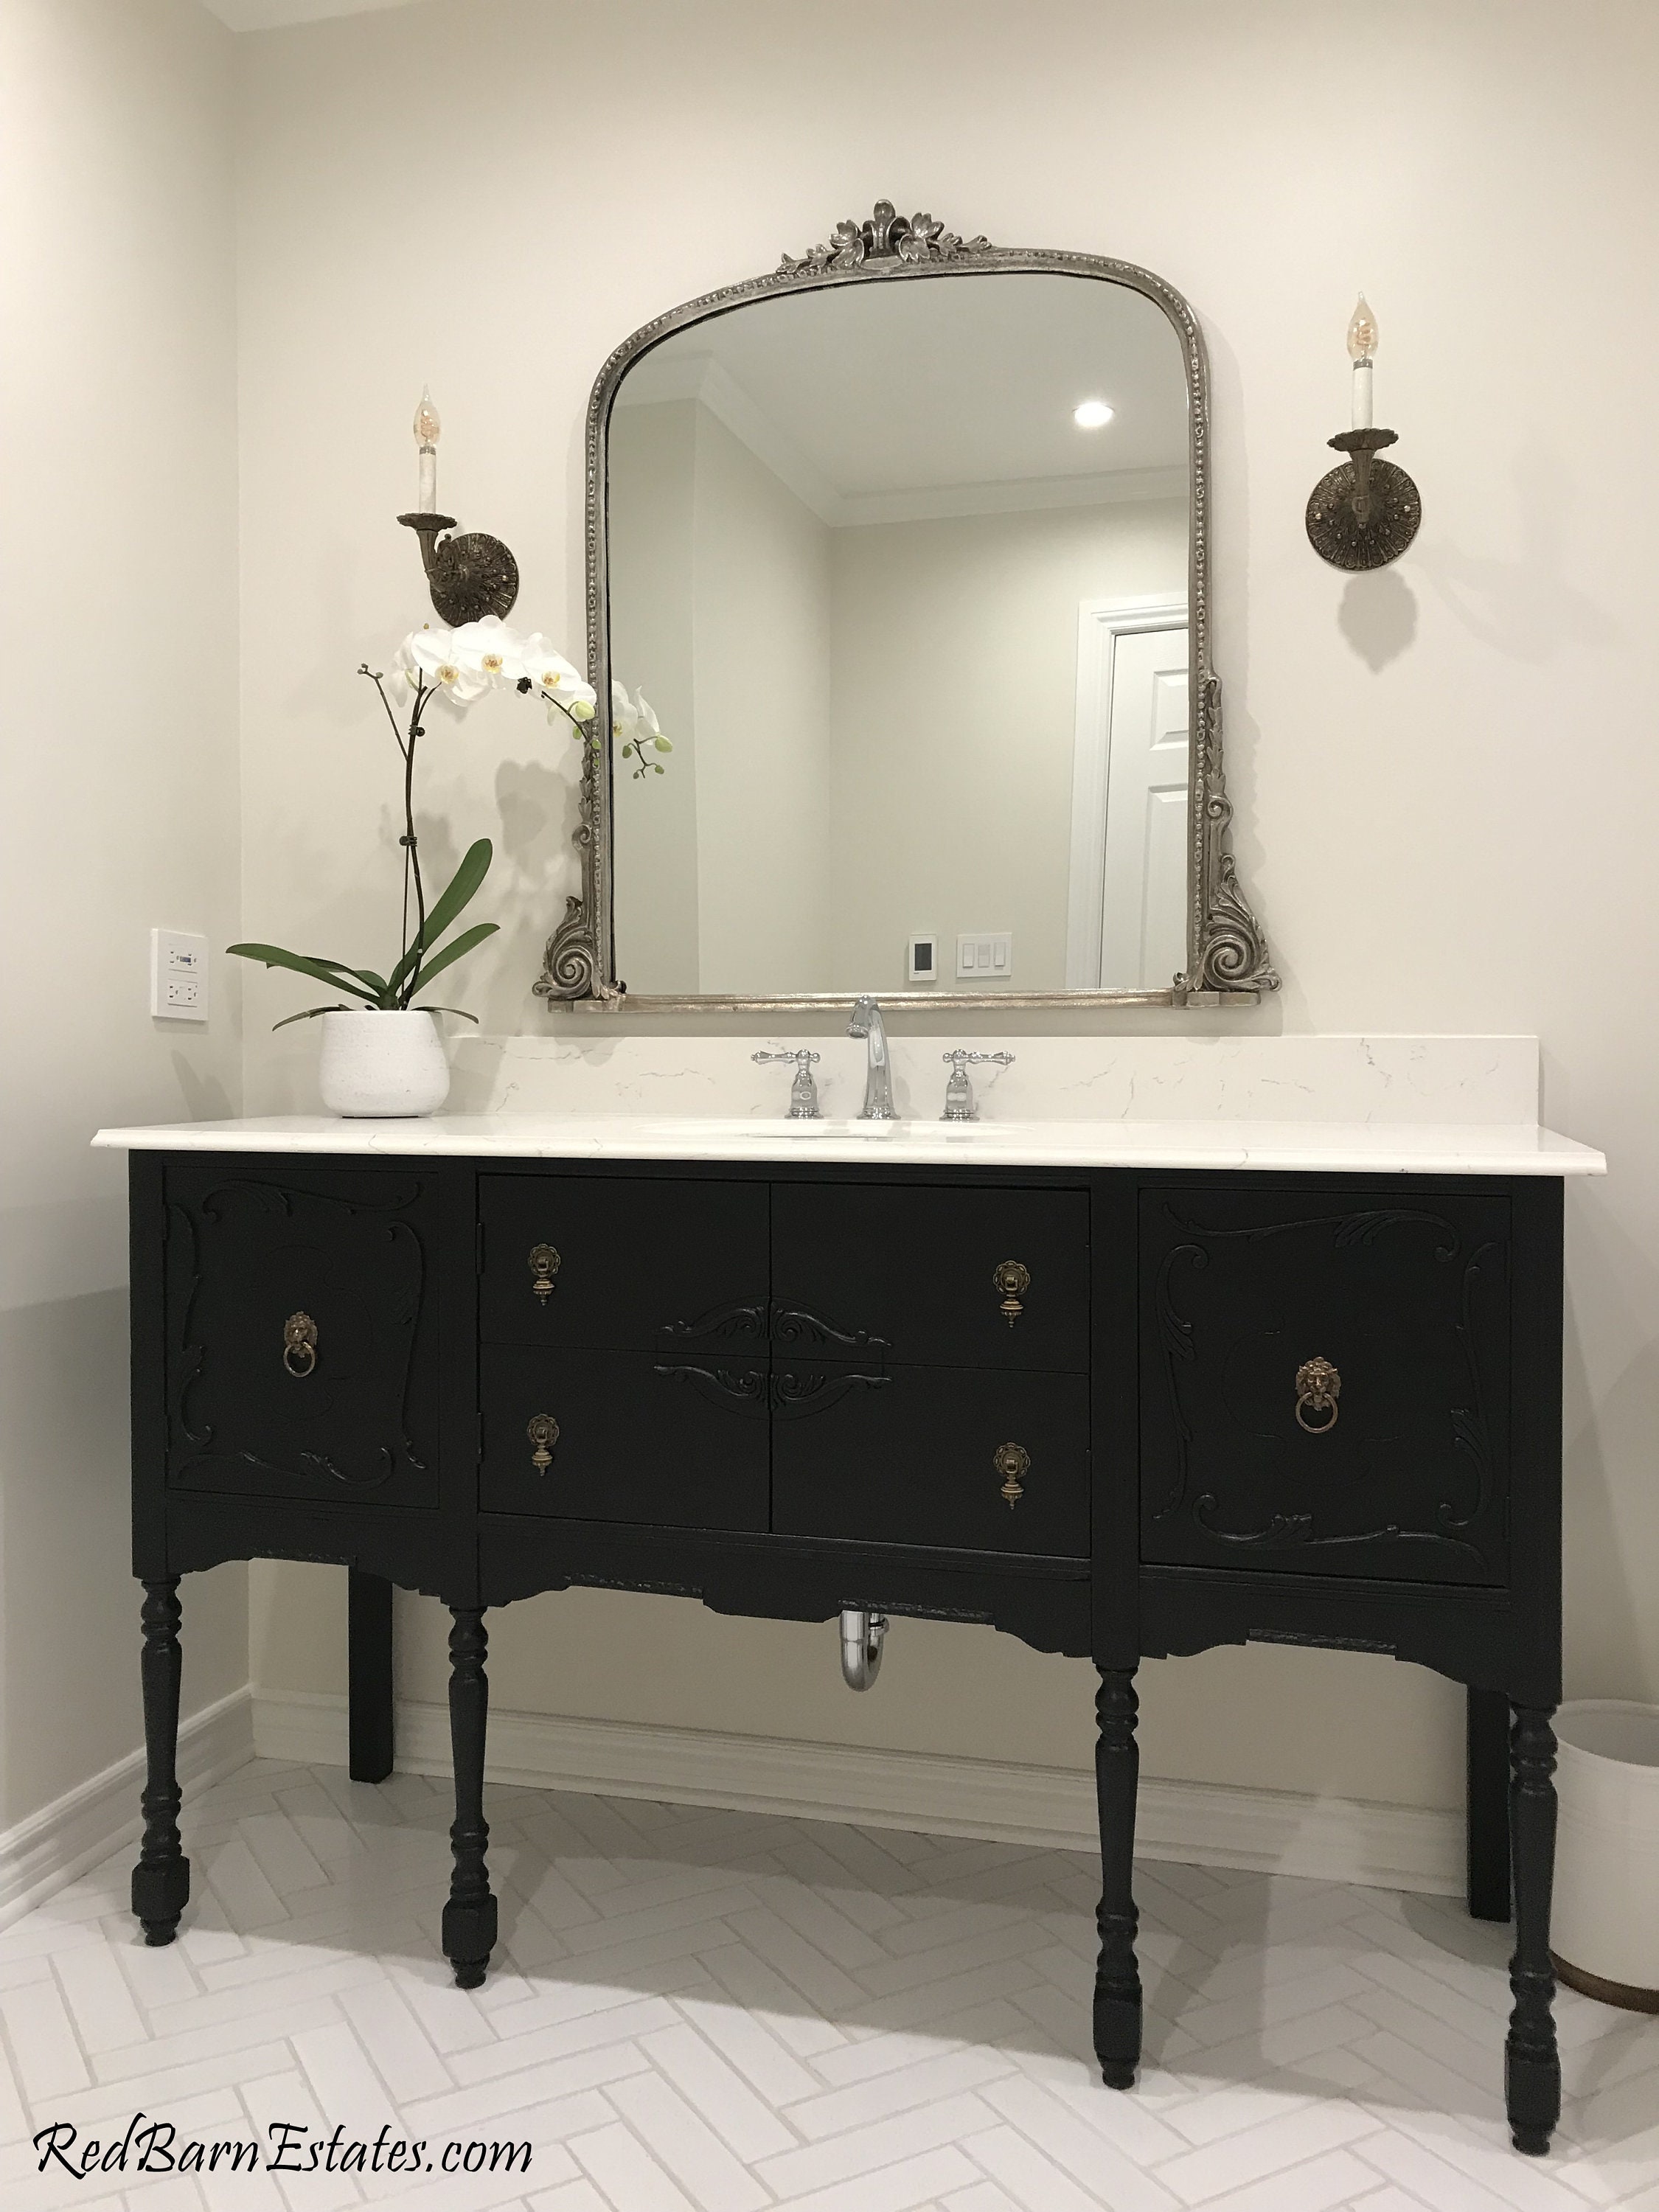 Antique Bathroom Vanity For Single Or Double Sink We Custom Convert From Antique Furniture For You Reno Remodeling 61 To 66 Wide